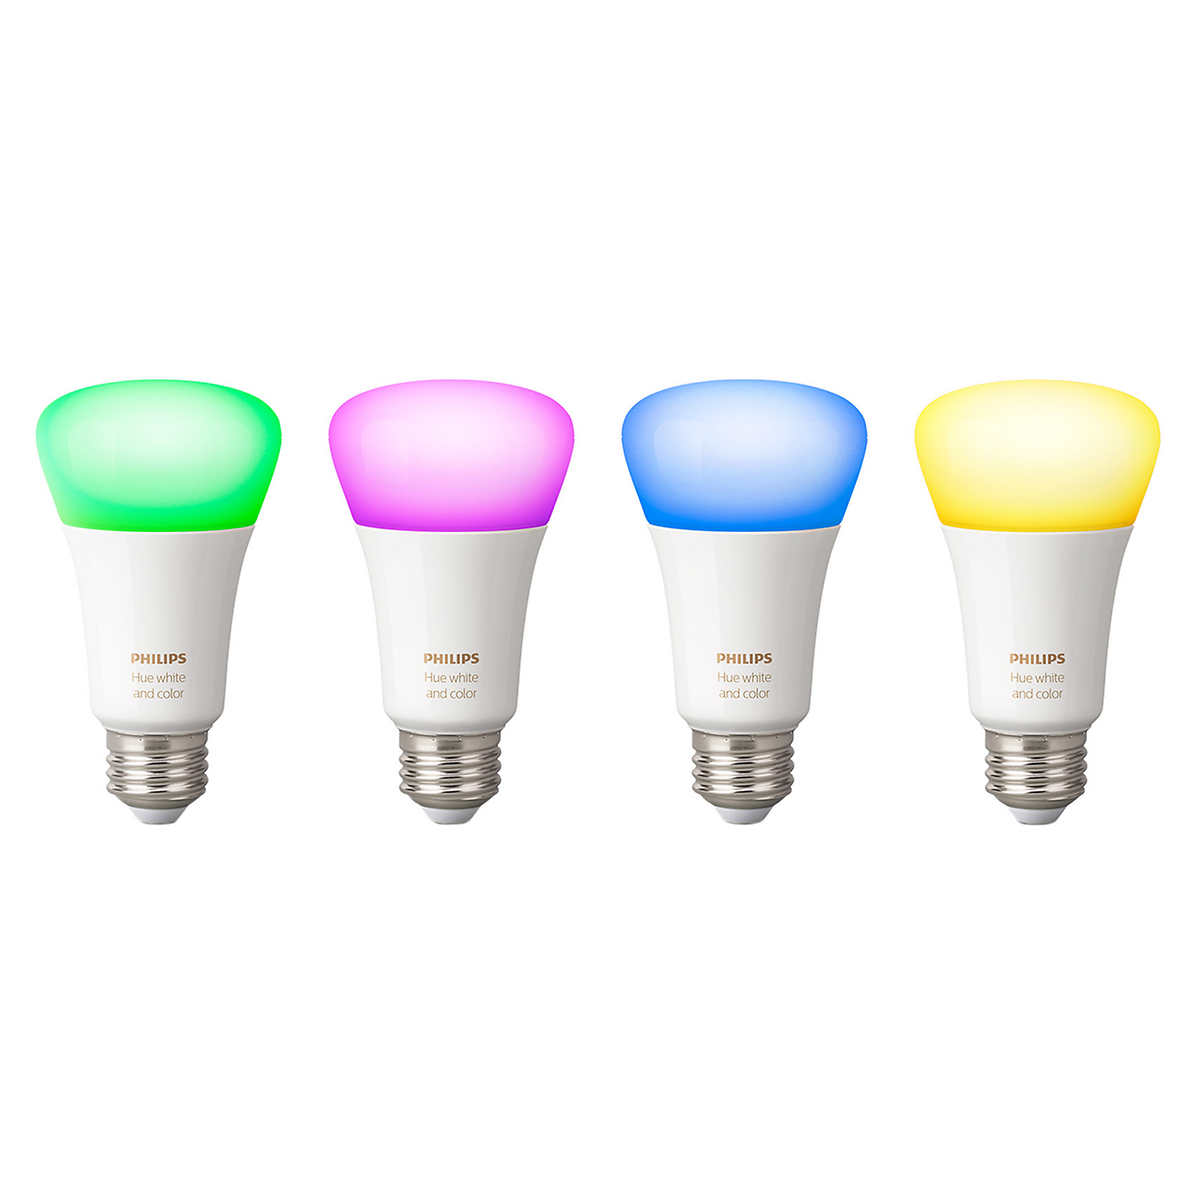 Philips Hue White And Color A19 Led Smart Bulbs 4 Pack Costco